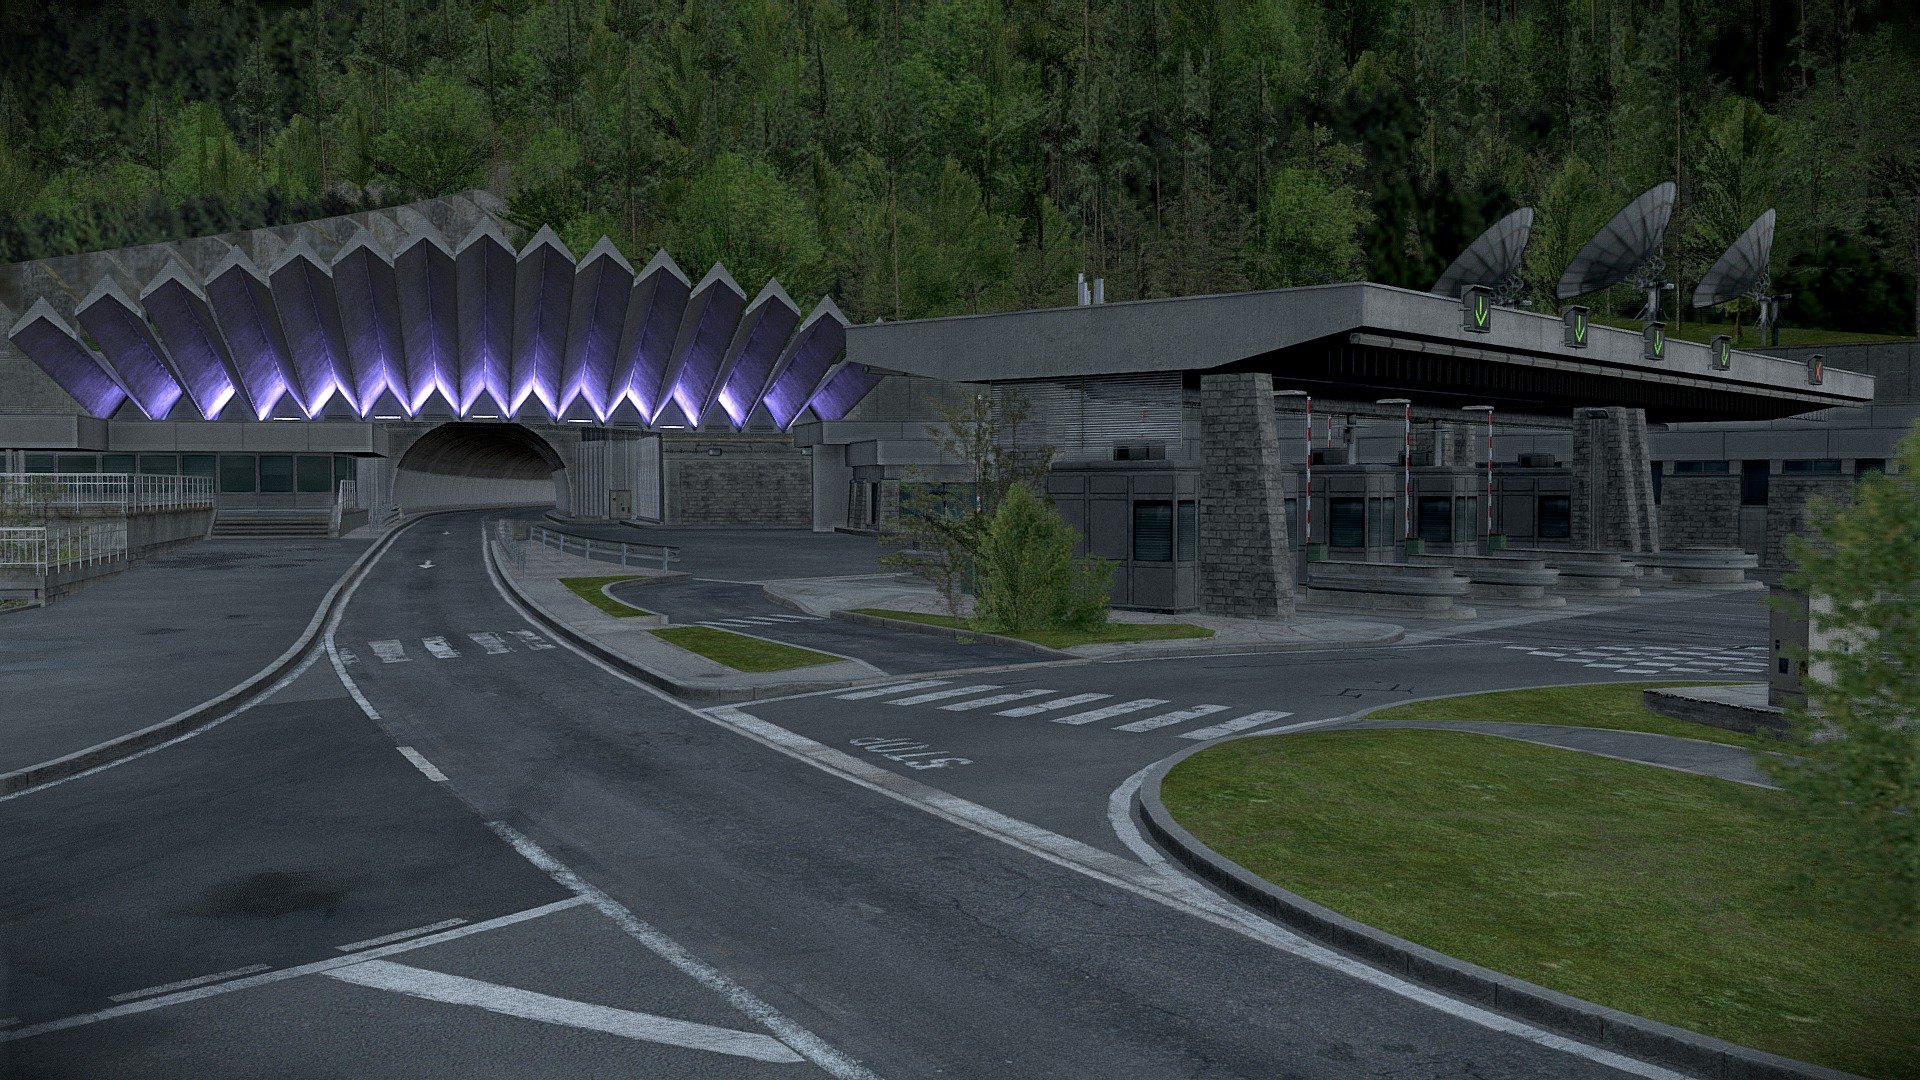 The Mont Blanc Tunnel is a highway tunnel between France and Italy, under the Mont Blanc mountain in the Alps. This is a heavy file so the scene may take time to load!



 

Scene Information:




Modelled in Blender 4.0

Fully UV unwrapped

Made in real world scale meters

Textures Included:




2k Baked building materials (Baked in AO)

2k Road textures (Diffuse and Roughness)

Non-compressed .PNG textures

Formats:




.obj

.fbx

.blend

Feel free to download the additional .RAR file for the blender format with packed external files and a read me section 3d model